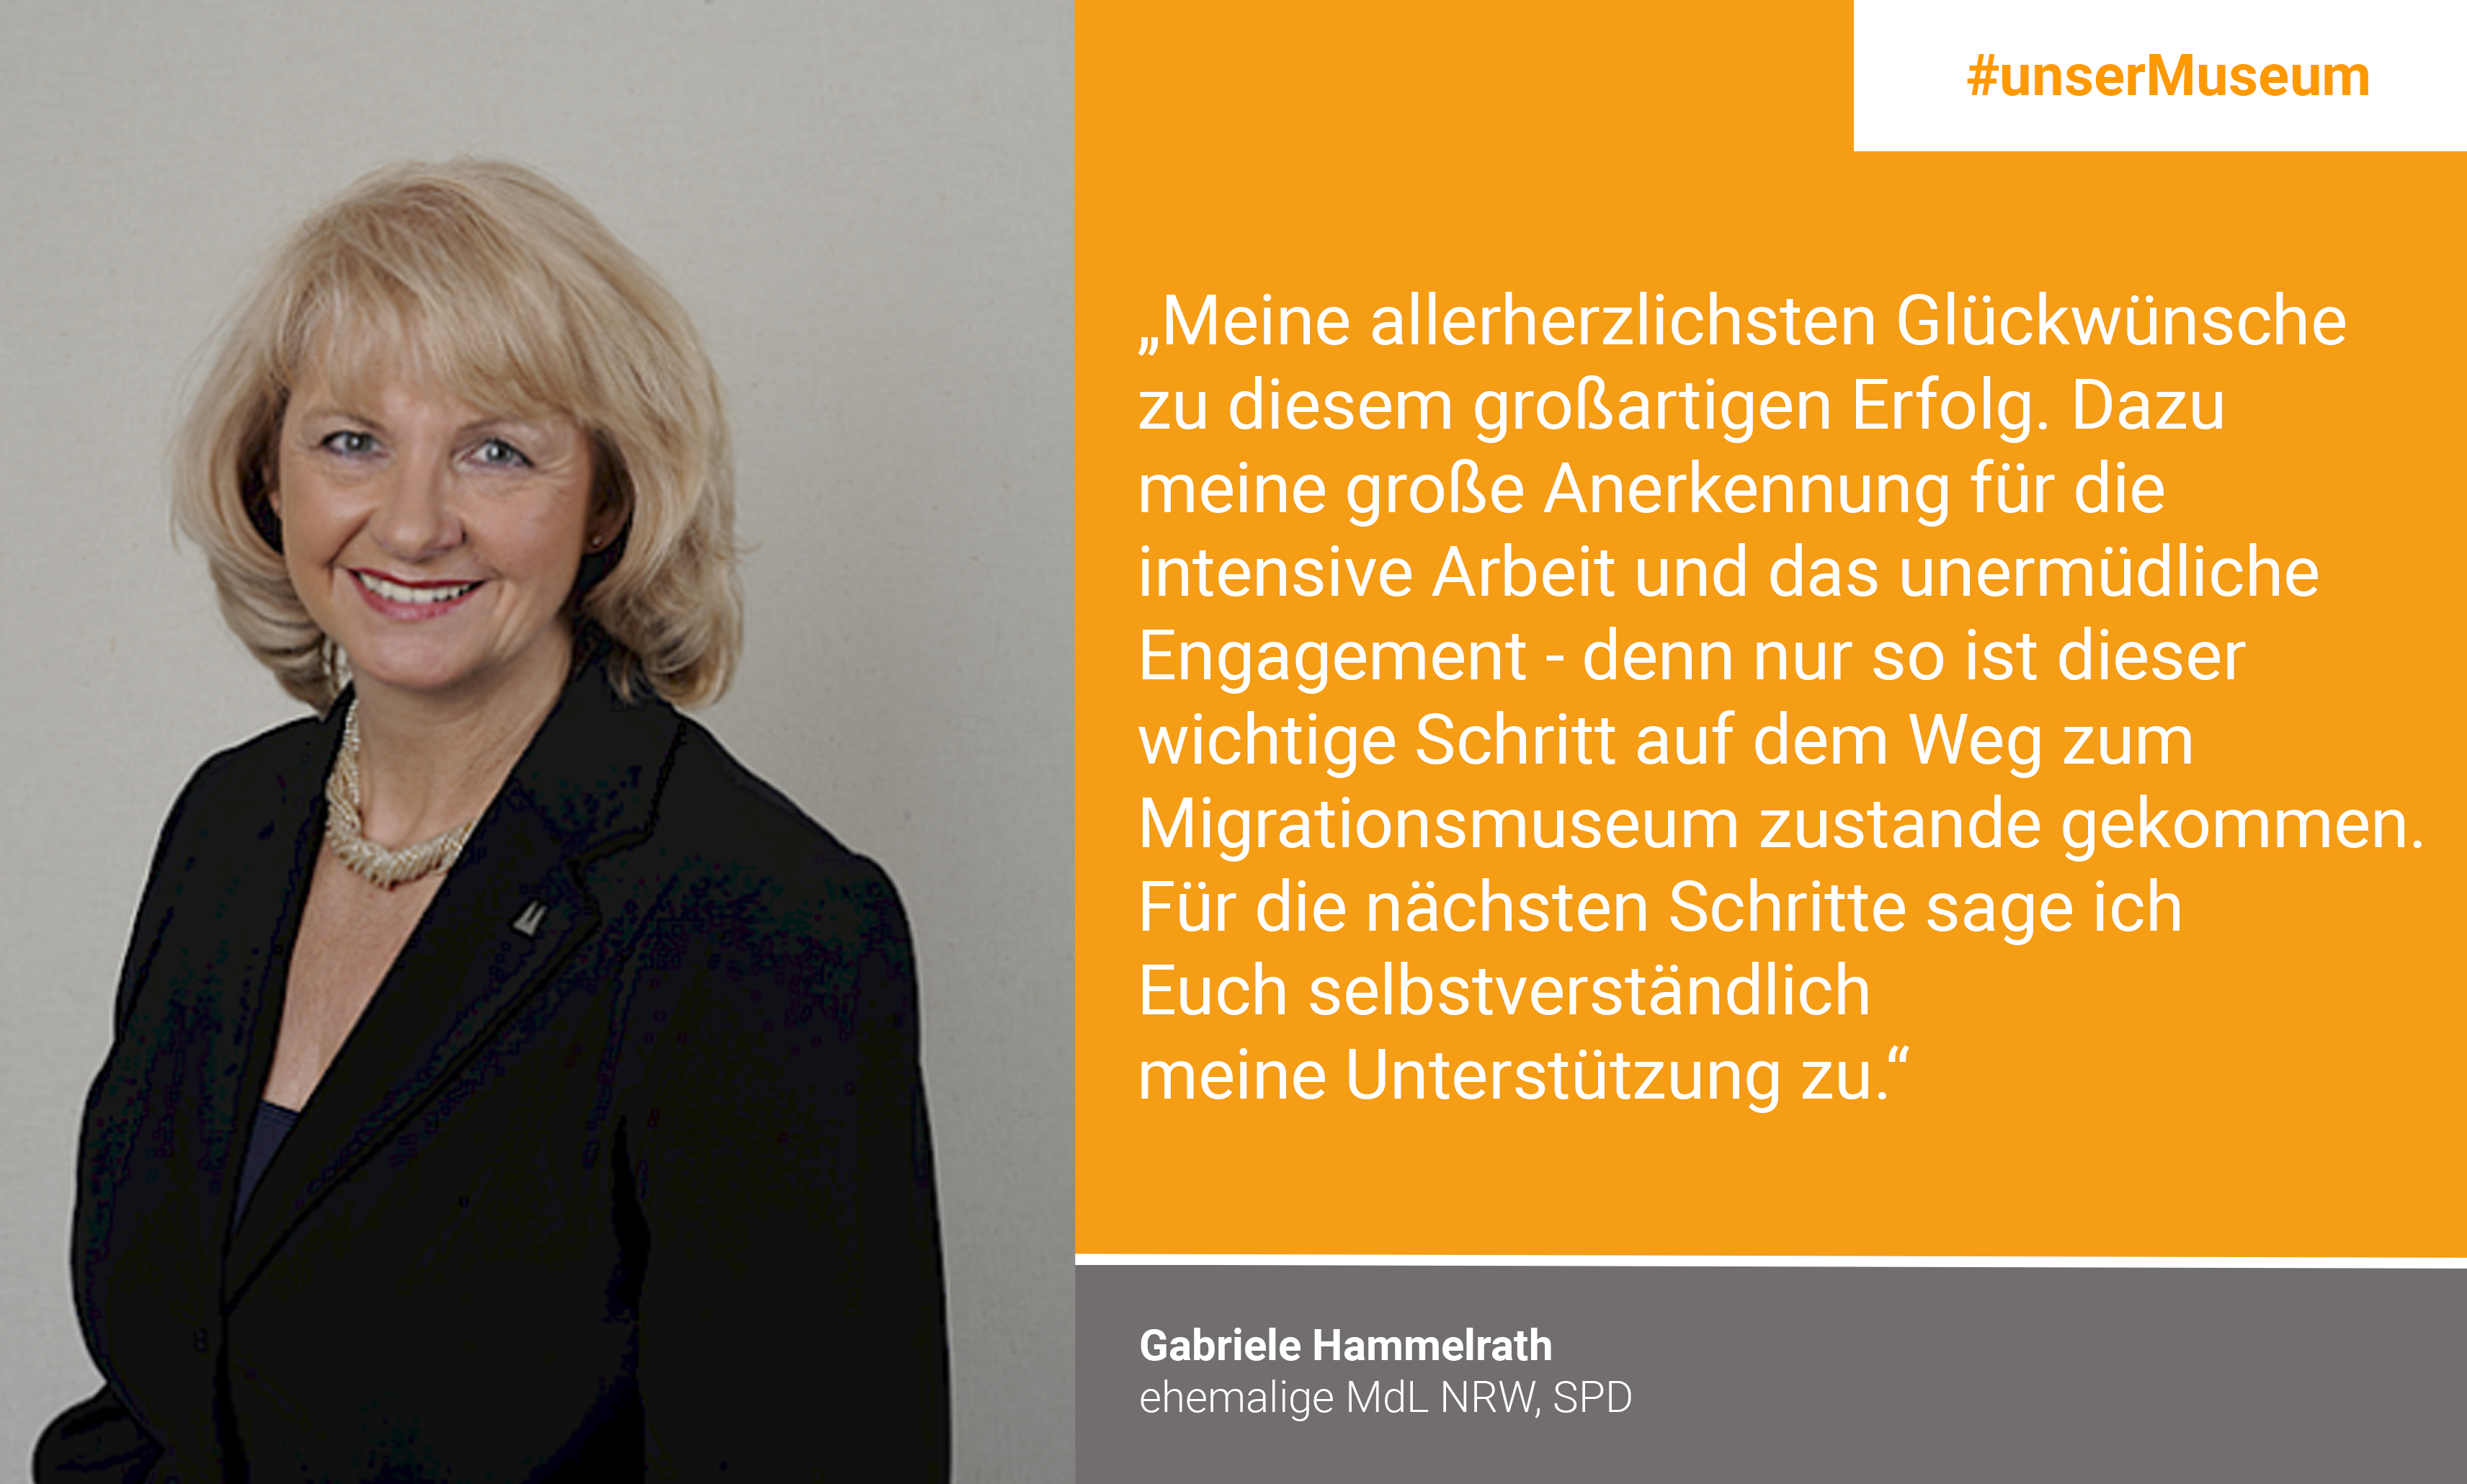 Gabriele Hammelrath, former Member of Parliament NRW, SPD: "My heartfelt congratulations on this great success. In addition, my great appreciation for the intensive work and the tireless commitment - because only through this has the important step on the way to the Migration Museum come about. Of course, I offer you my support for the next steps."